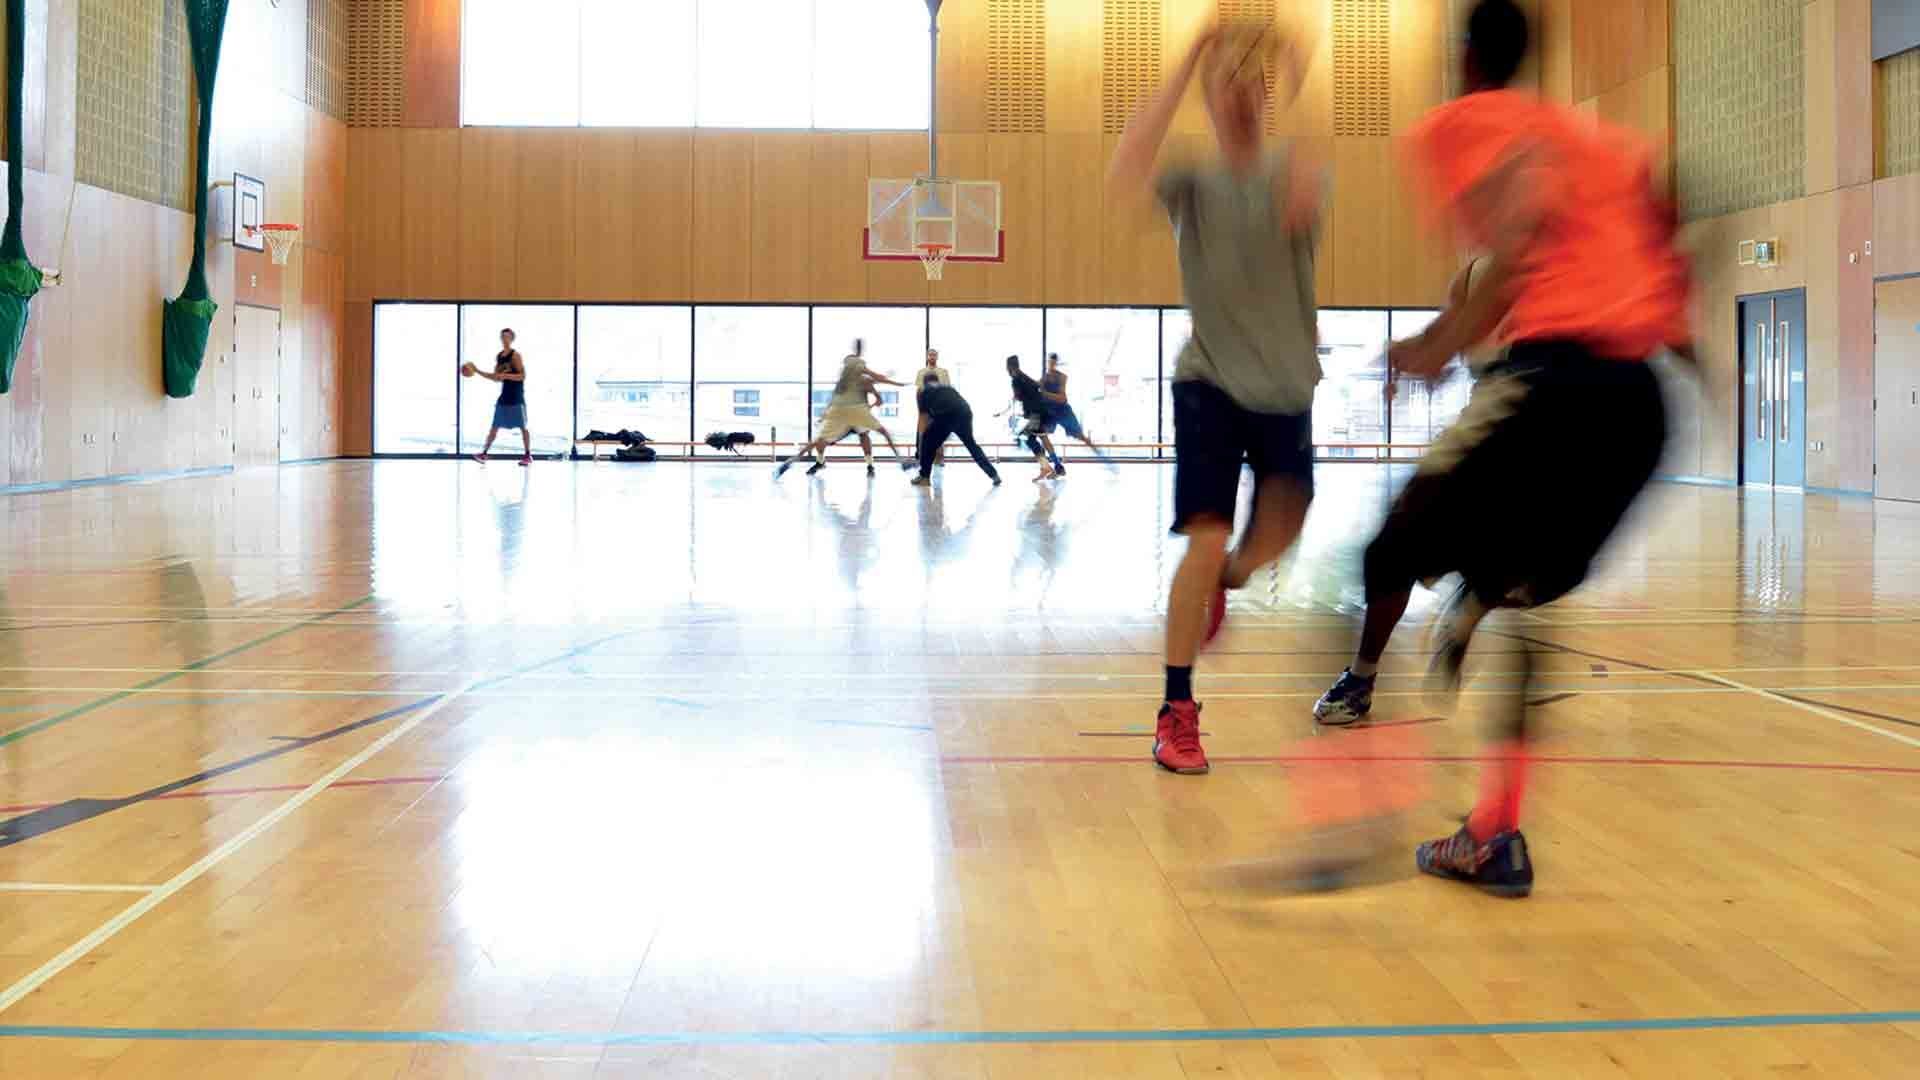 Buckinghamshire New University sports hall with two people playing basketball